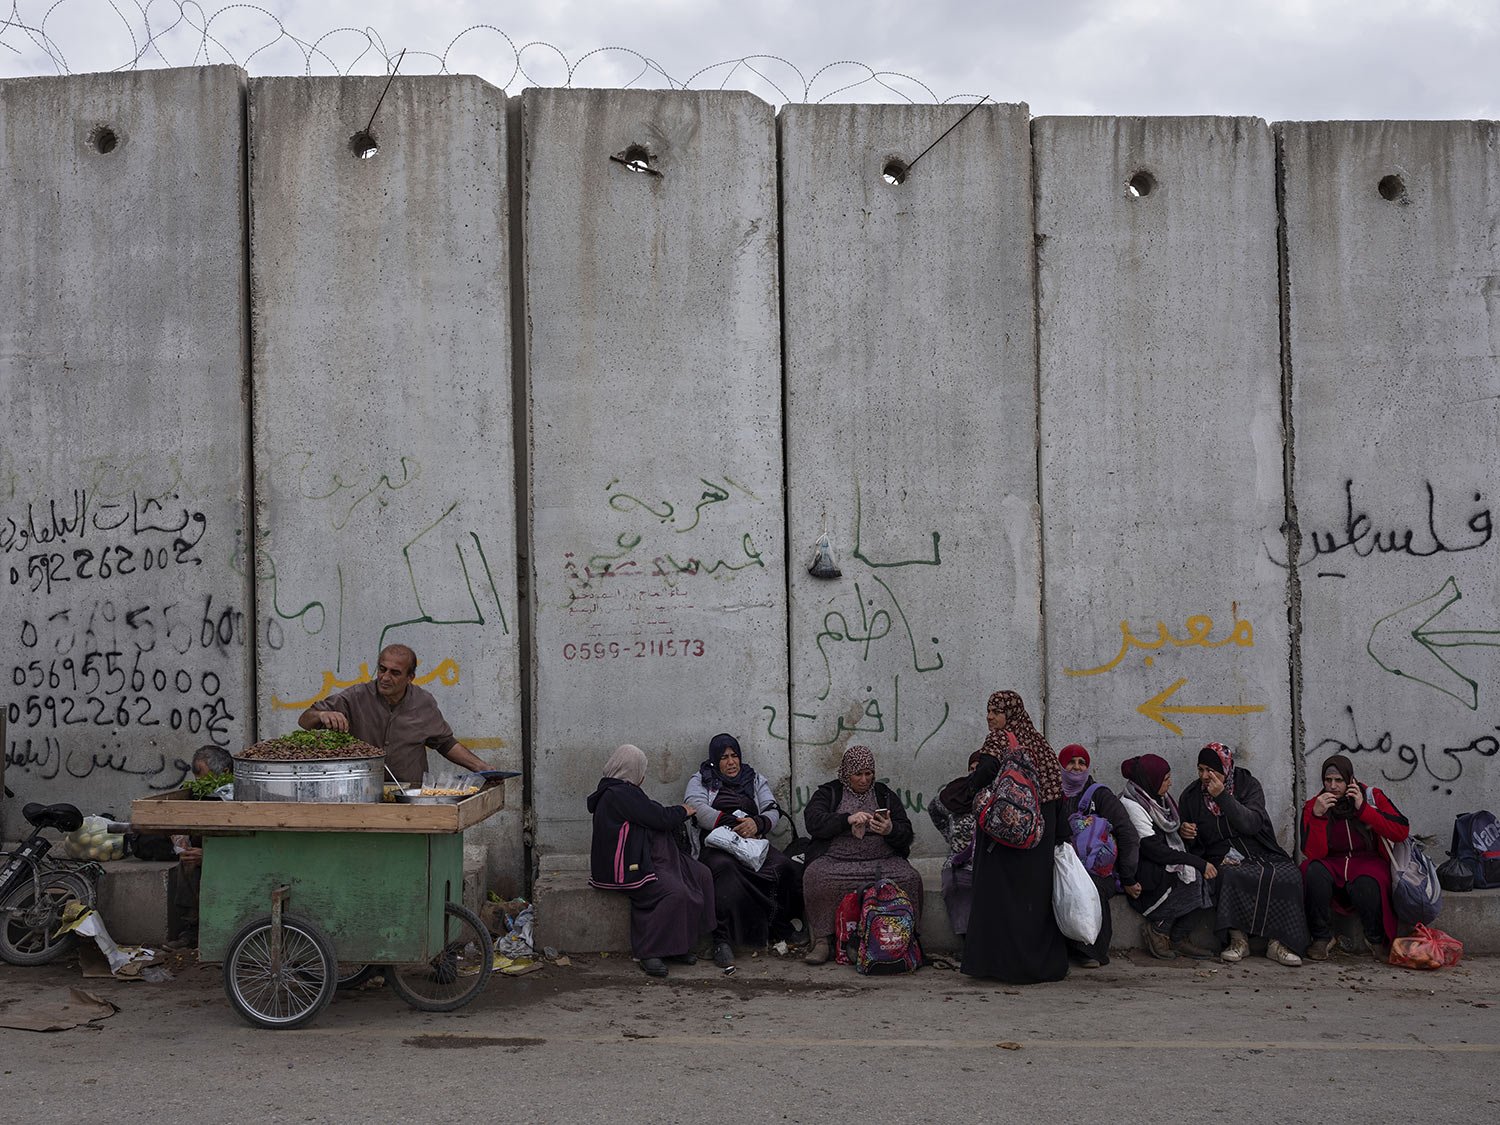  Palestinian women sit on a section of Israel's concrete separation barrier next to a small market at the West Bank city of Qalqilya, March 9, 2022. (AP Photo/Oded Balilty) 